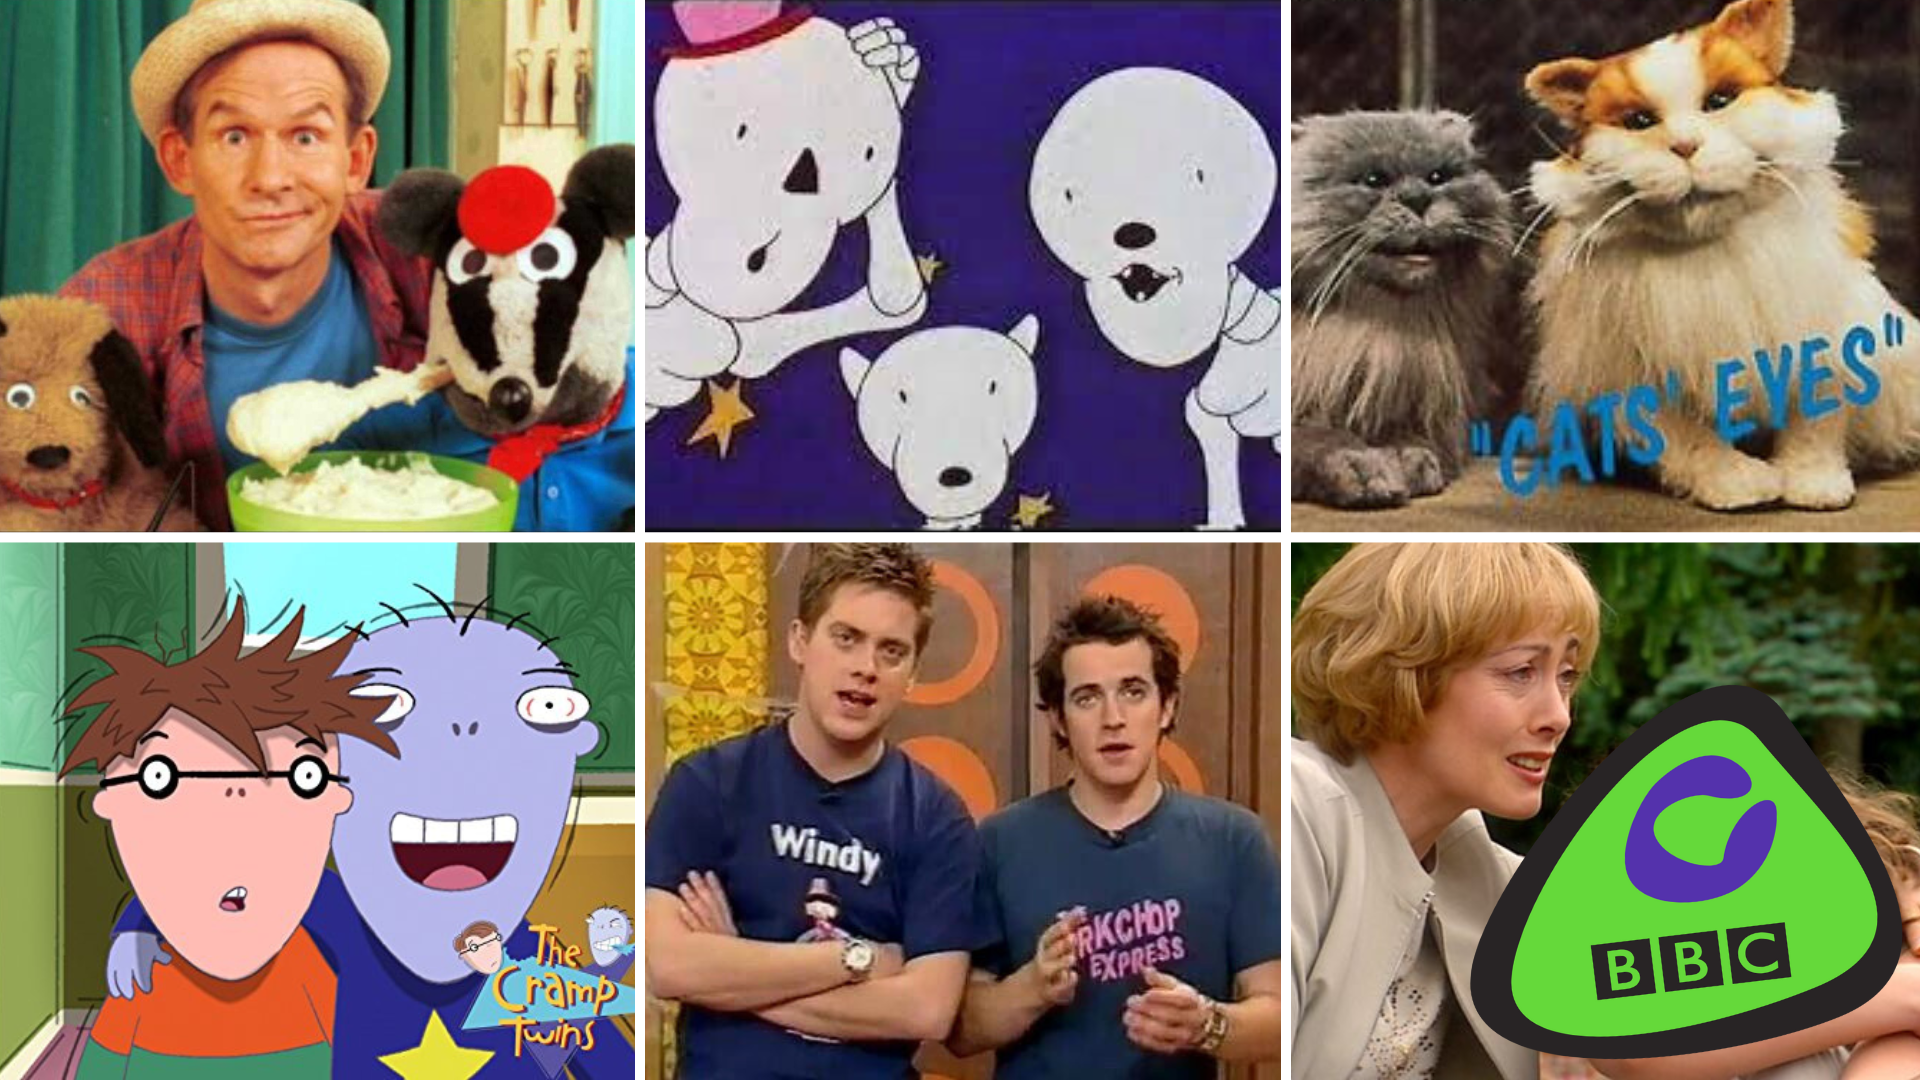 Children's TV Shows CBBC 1990s/2000s - Revisiting The Top 1990s/2000s Children's TV Shows On CBBC